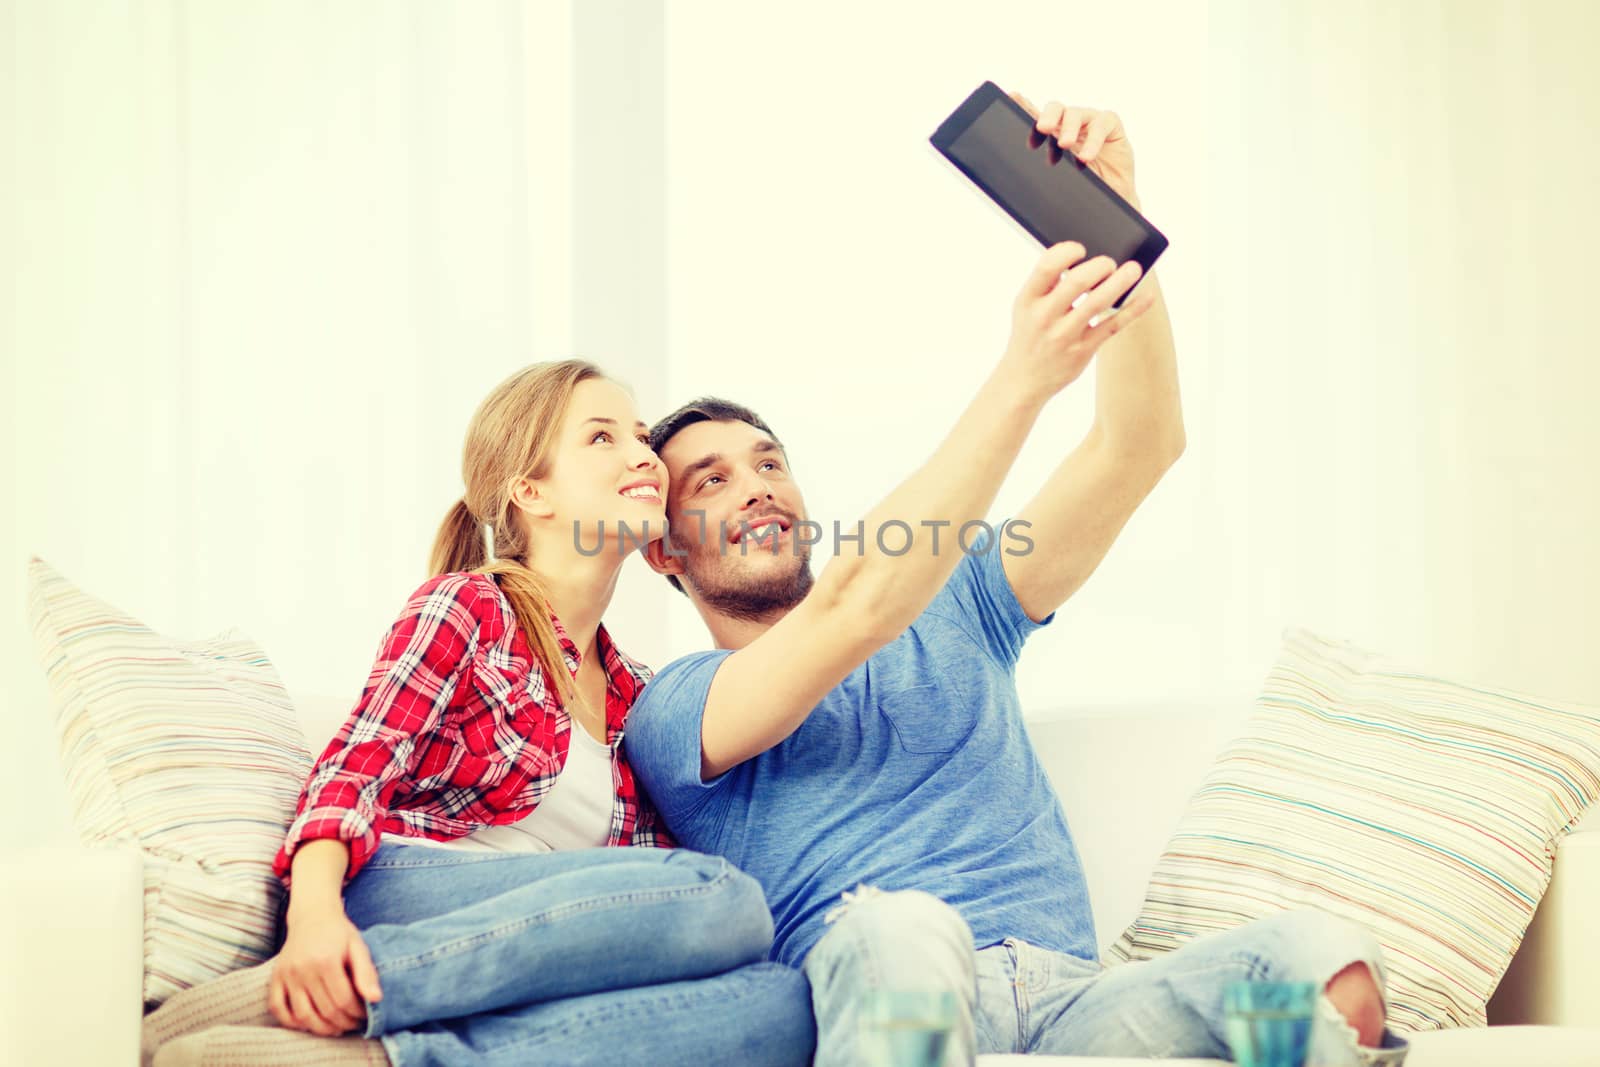 home, technology and relationships concept - smiling couple with tablet pc computer at home